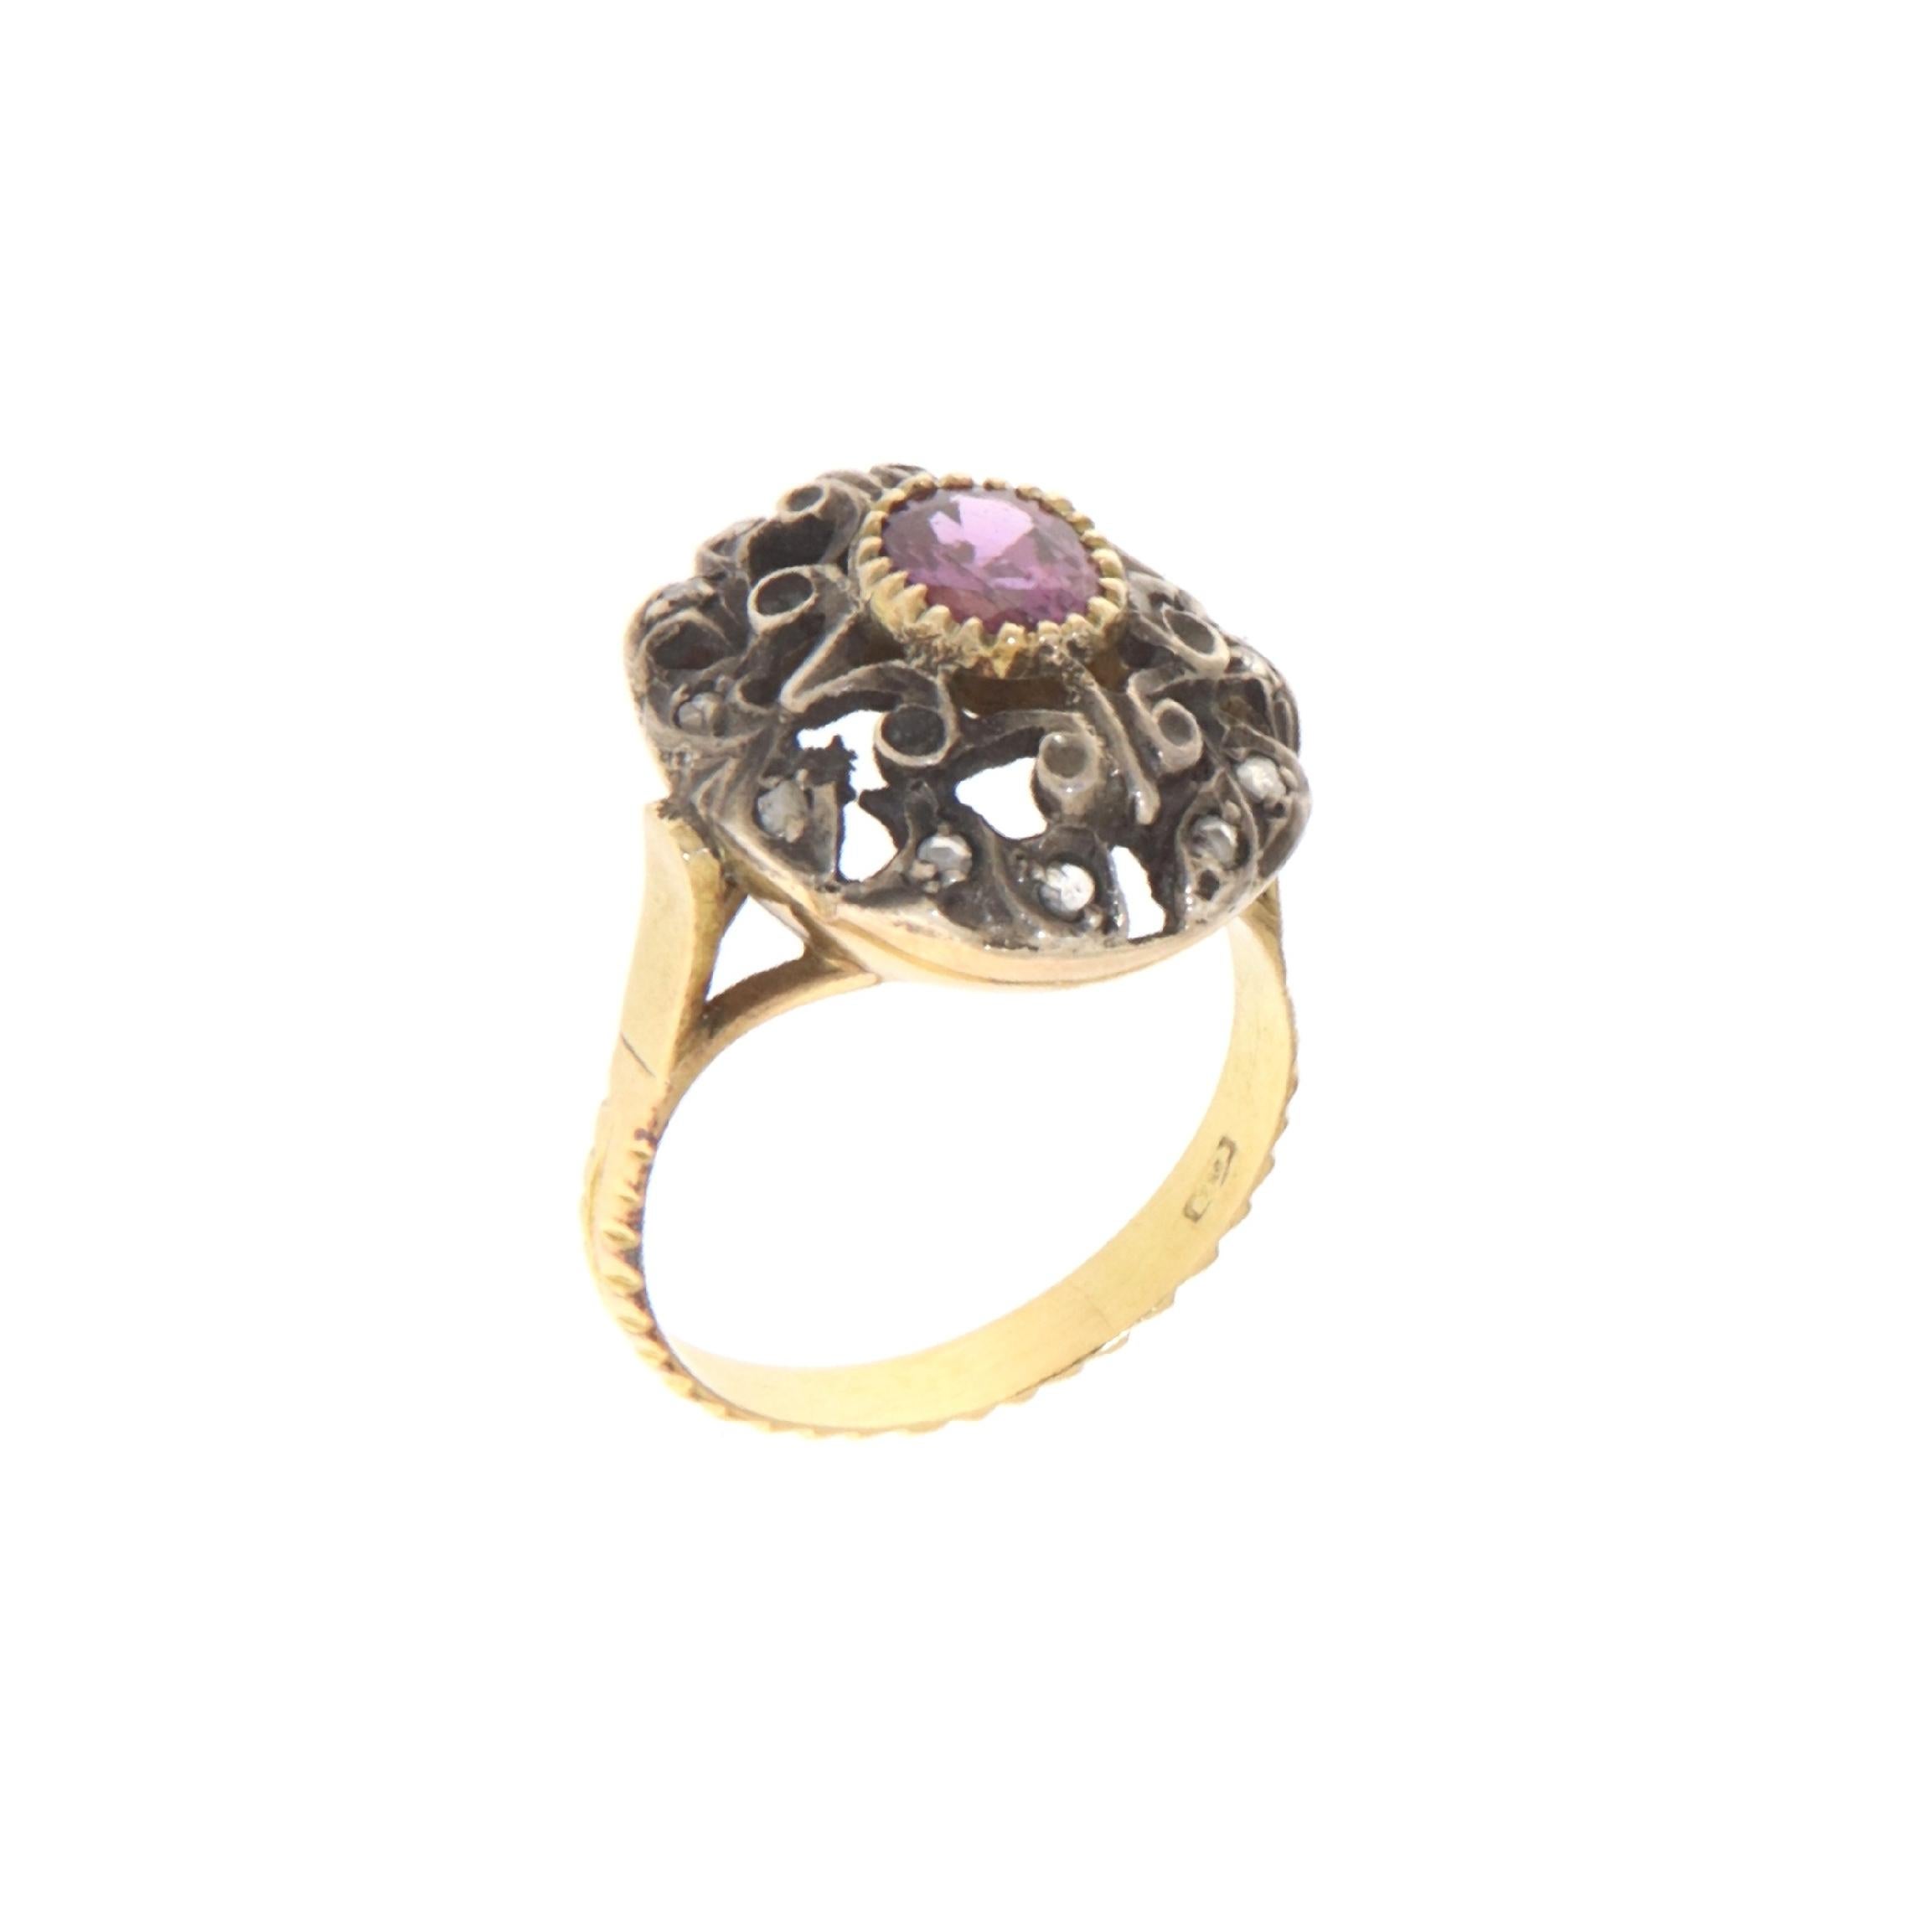 This exquisite ring harmoniously blends 18-karat yellow gold with 800 silver to create a piece that's rich in texture and history. At the center, a radiant ruby takes pride of place, its deep pink hue a symbol of passion and love. The ruby is